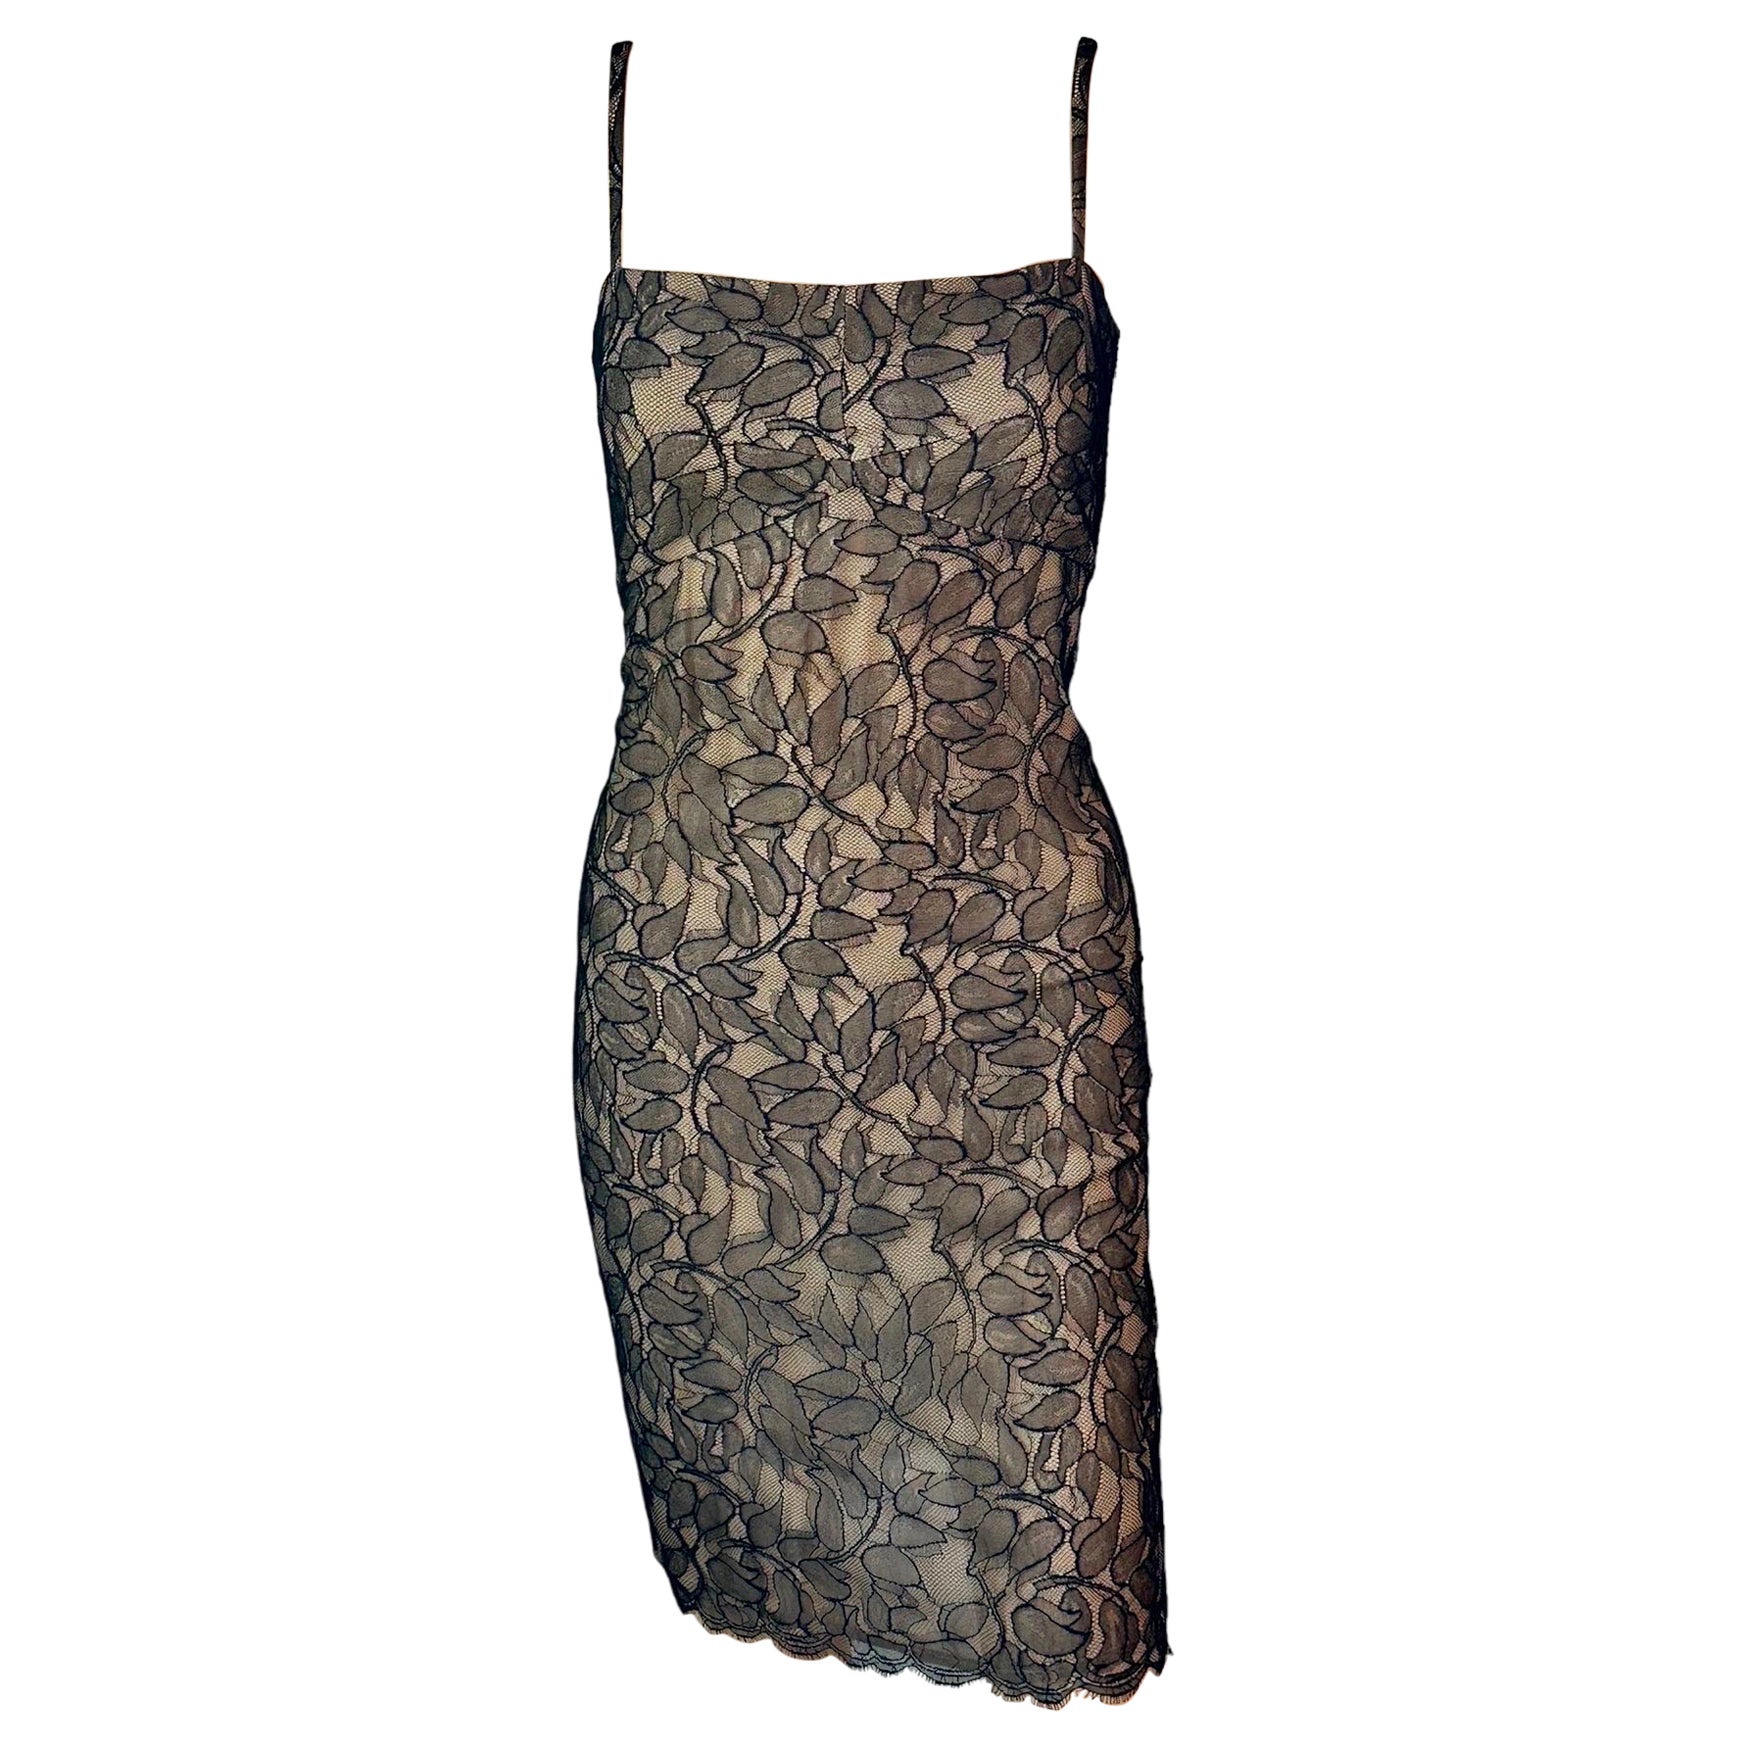 Gianni Versace Istante c. 1998 Sheer Lace Mini Dress For Sale